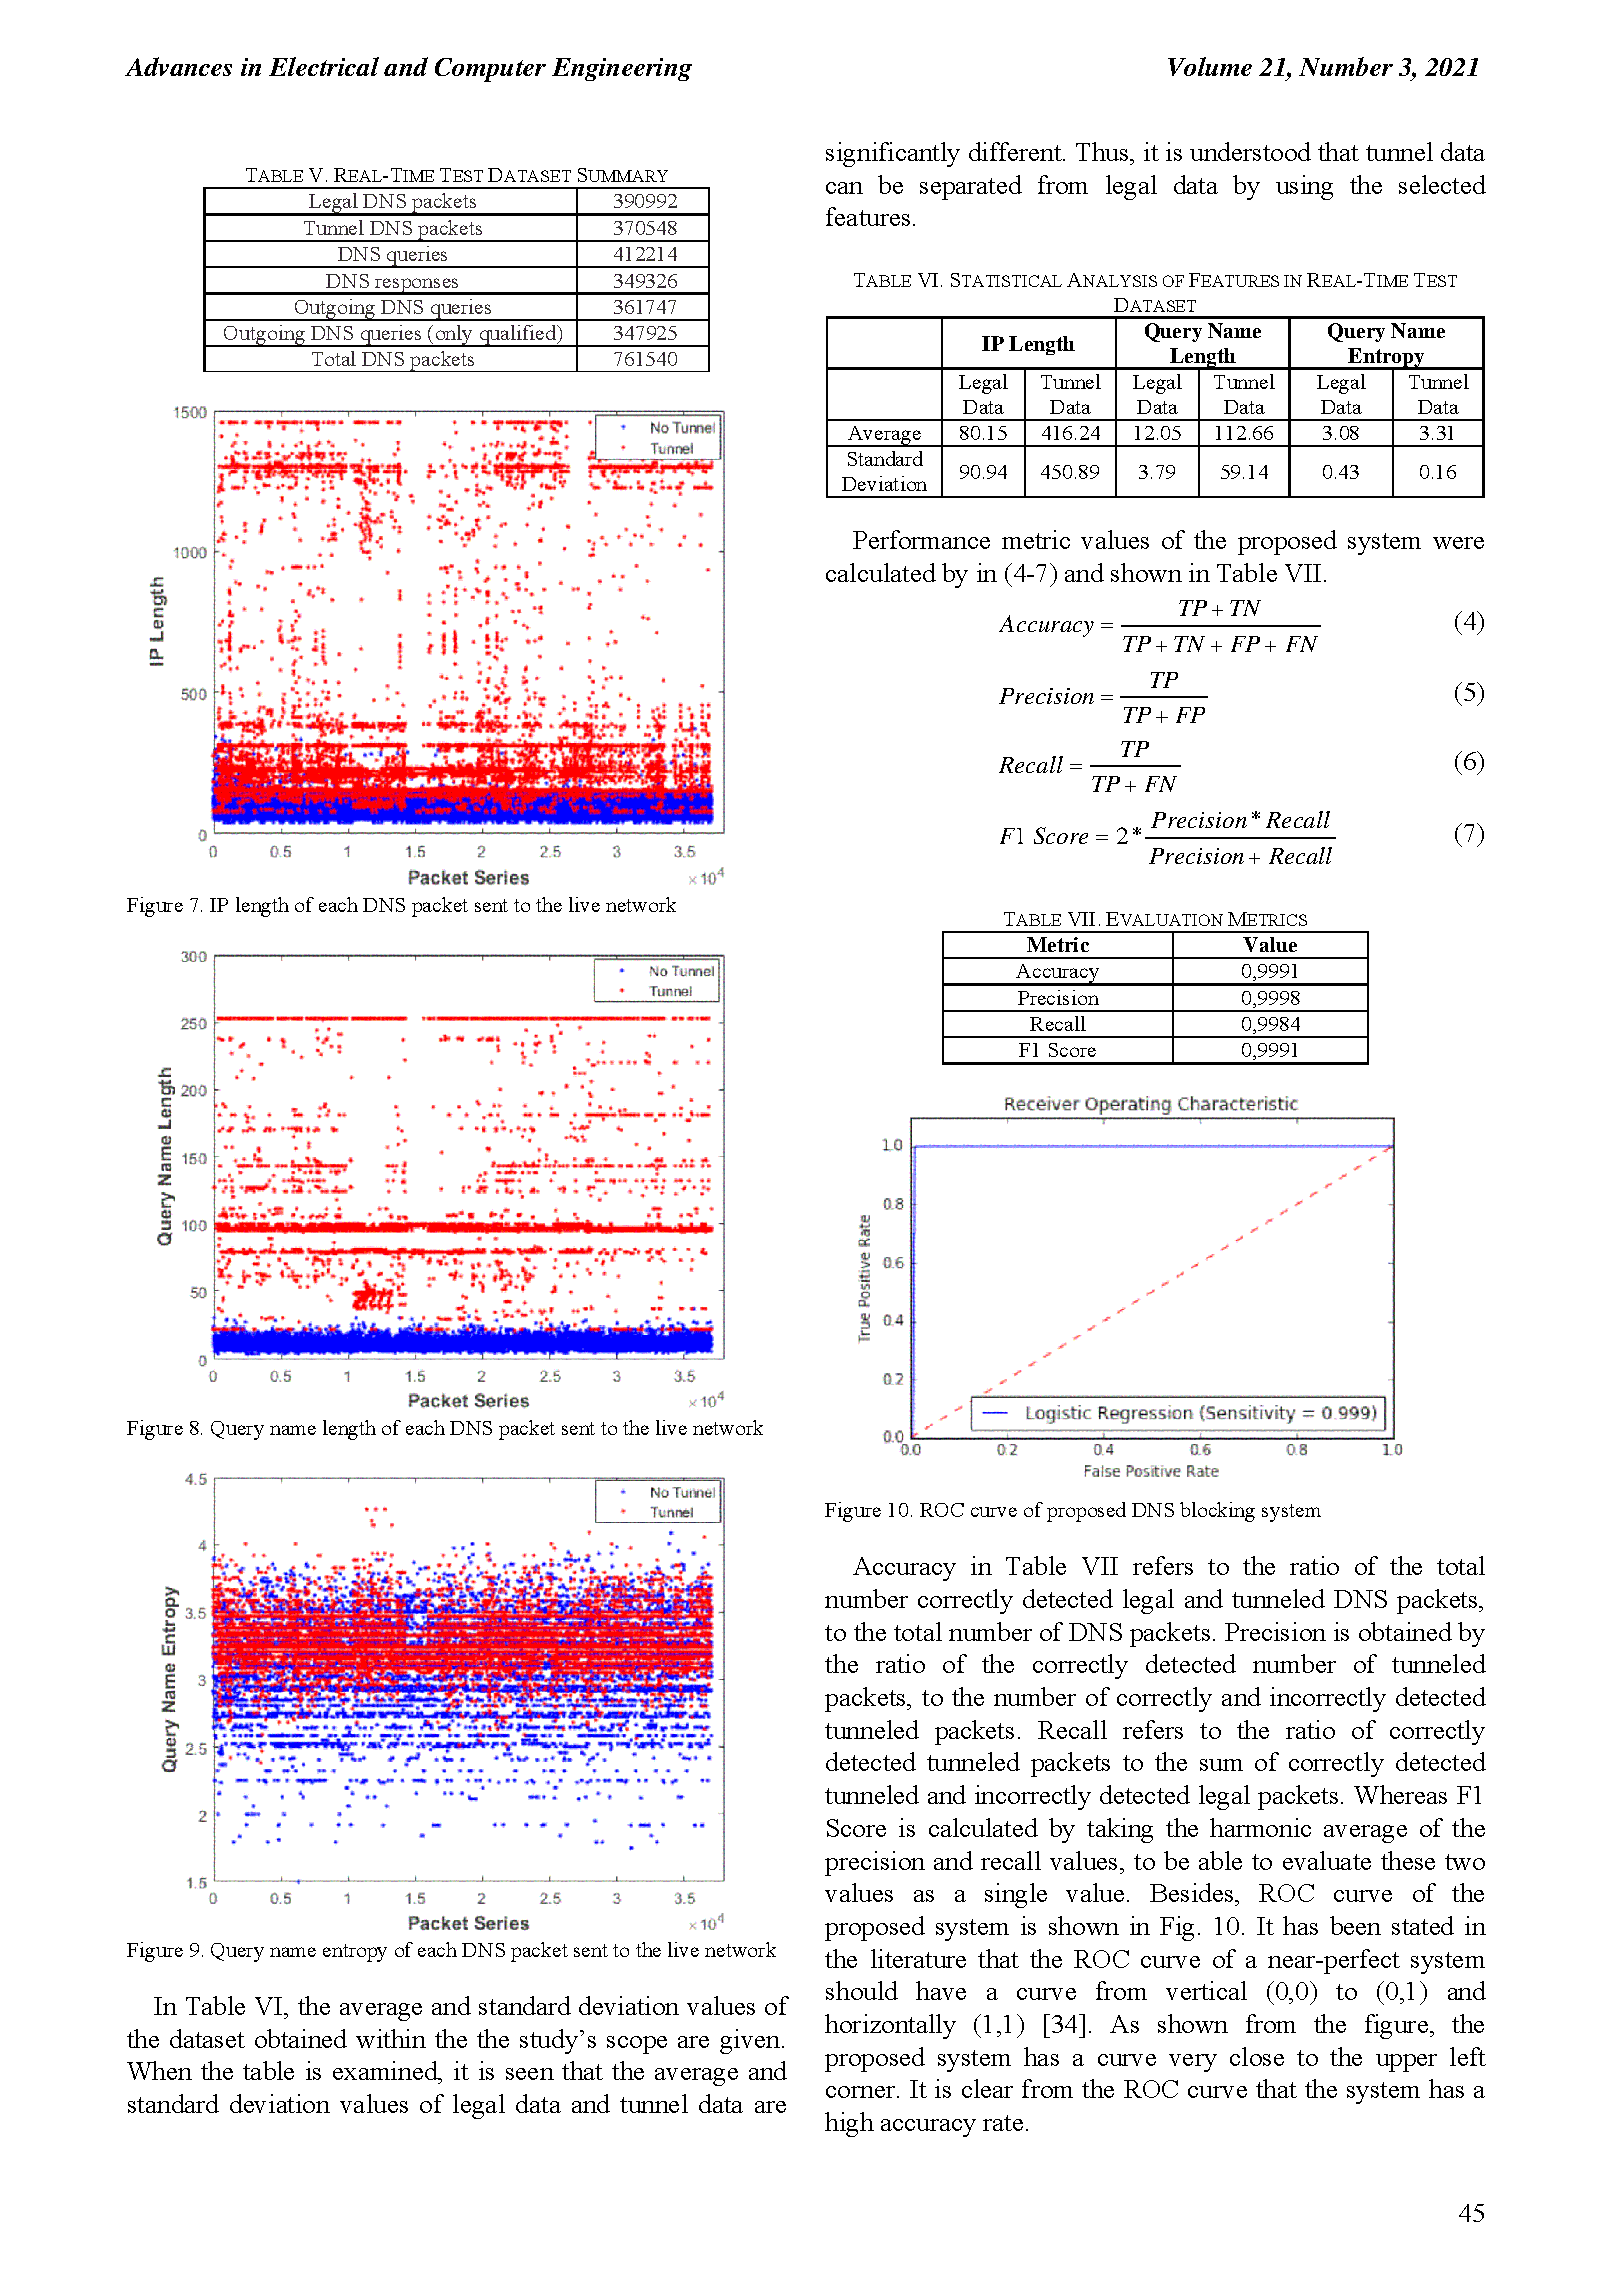 PDF Quickview for paper with DOI:10.4316/AECE.2021.03005